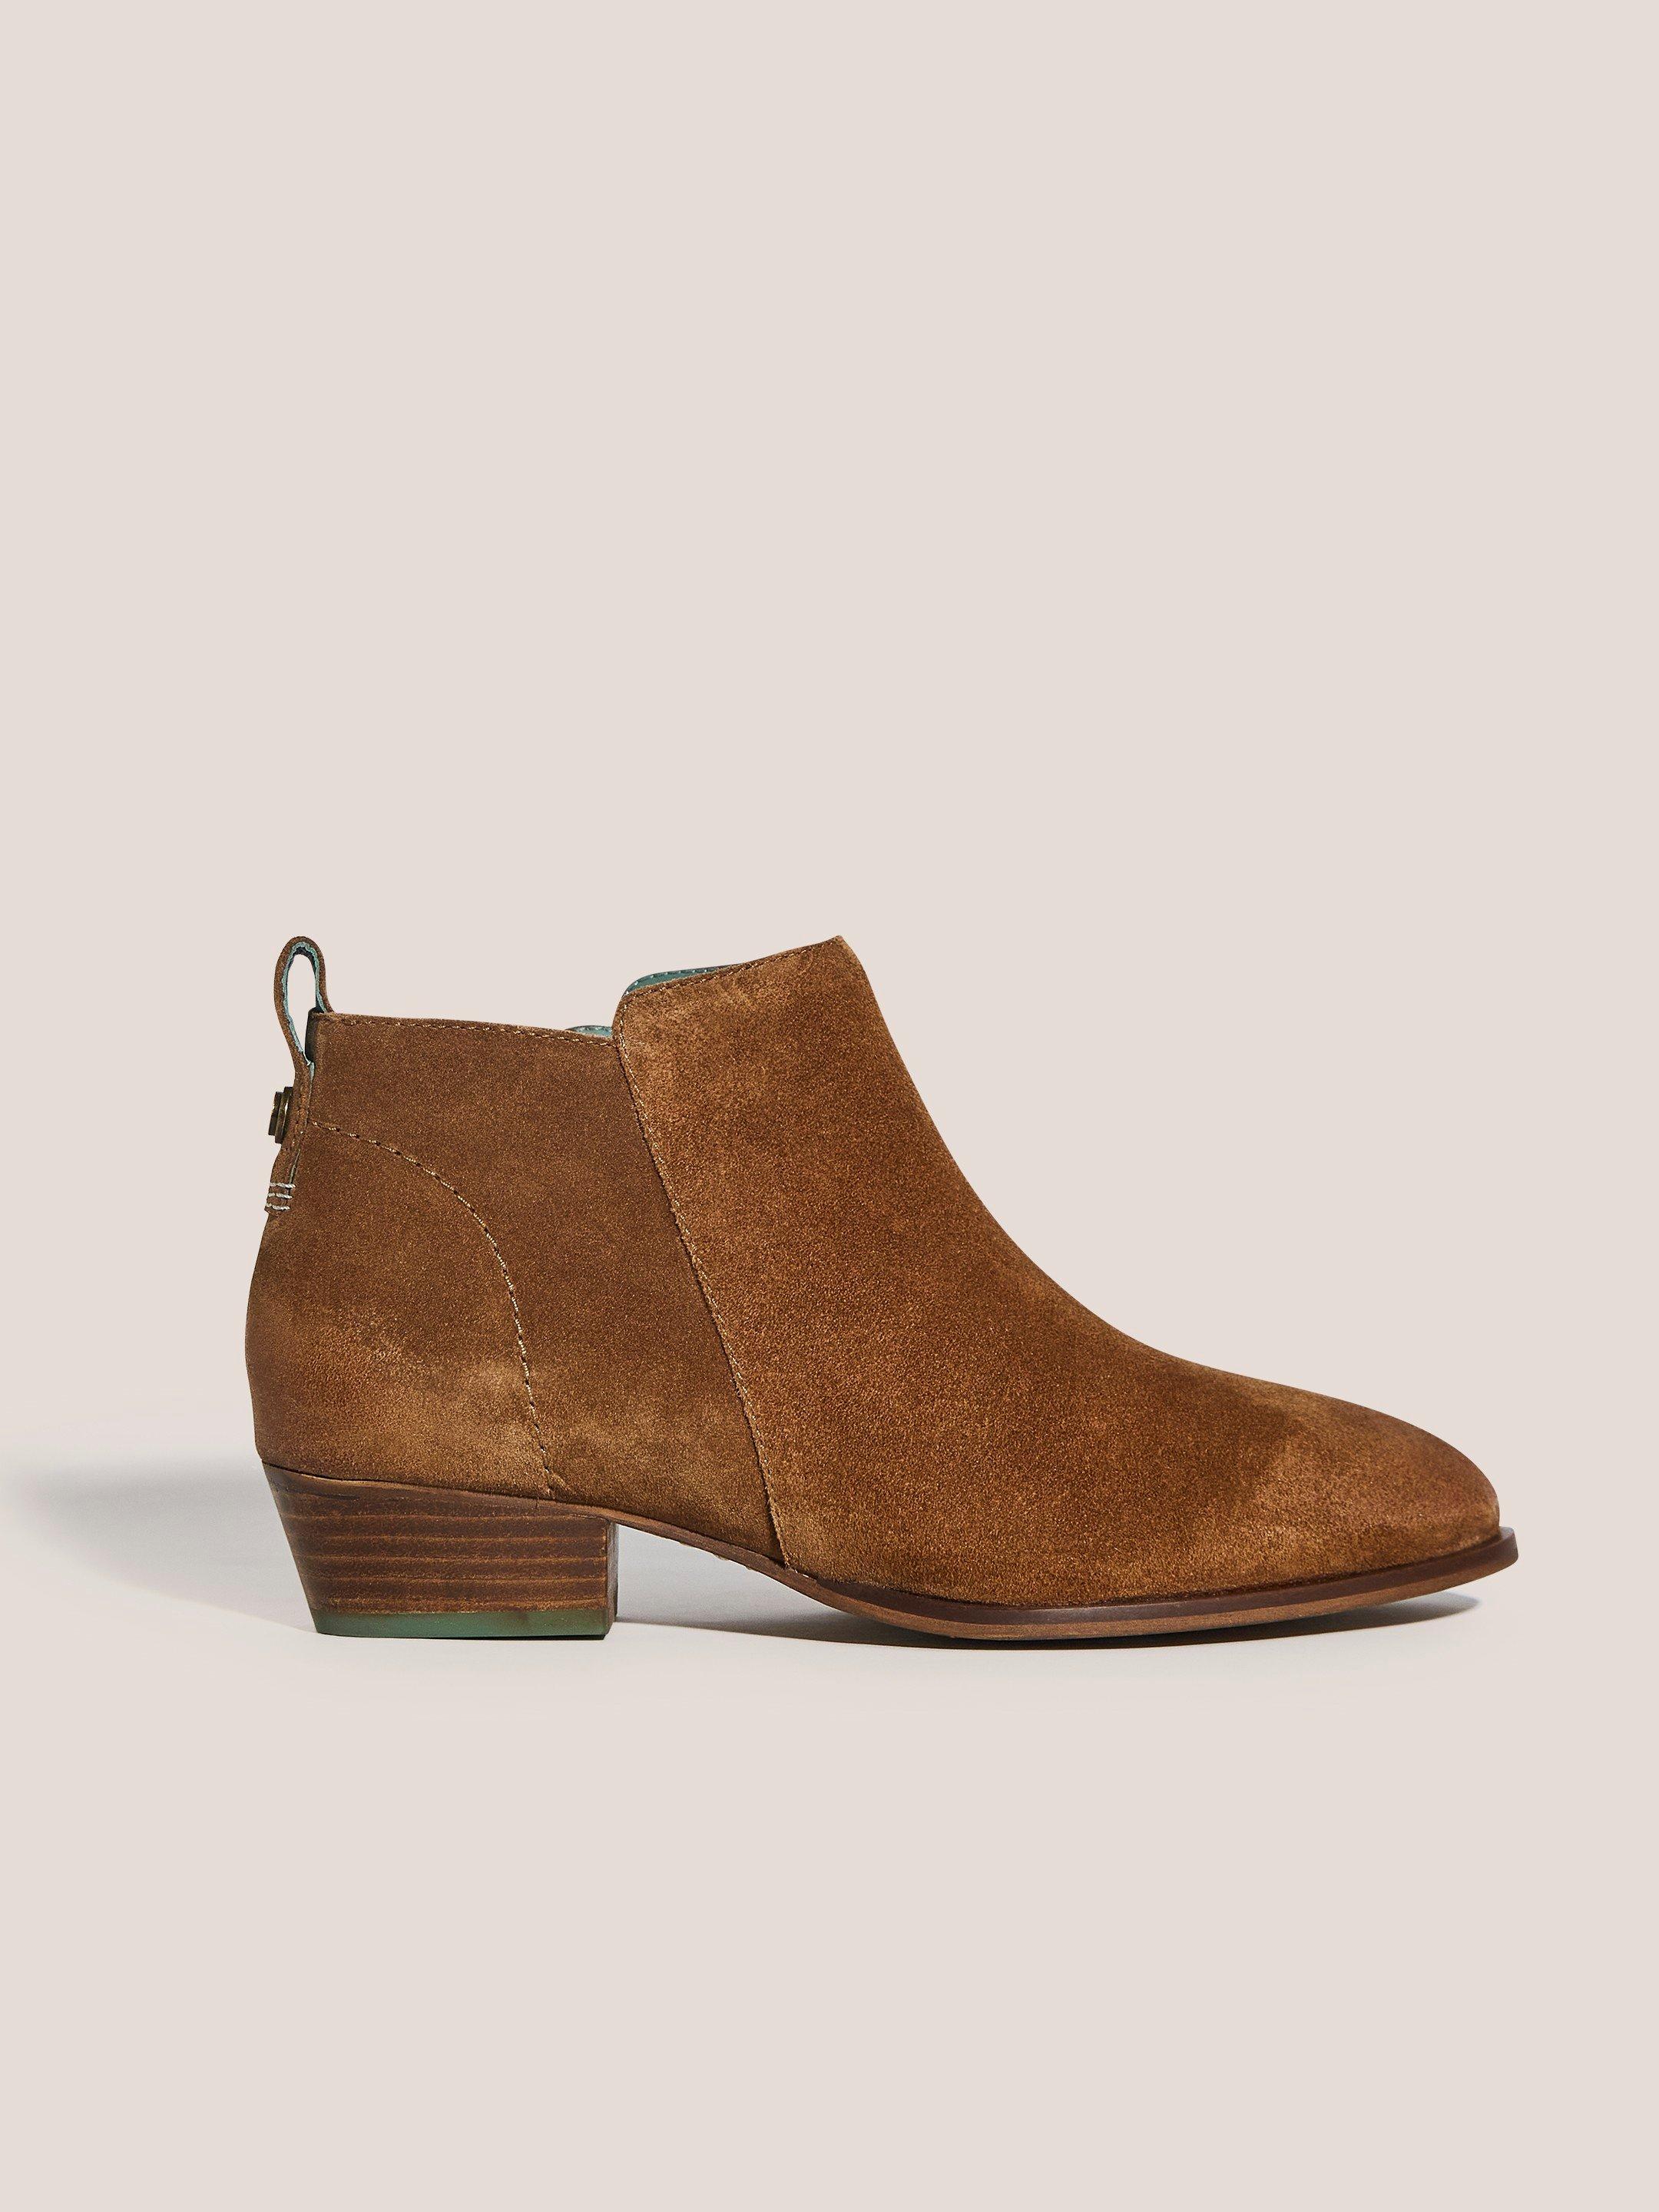 Willow Suede Ankle Boot in DARK TAN - MODEL FRONT